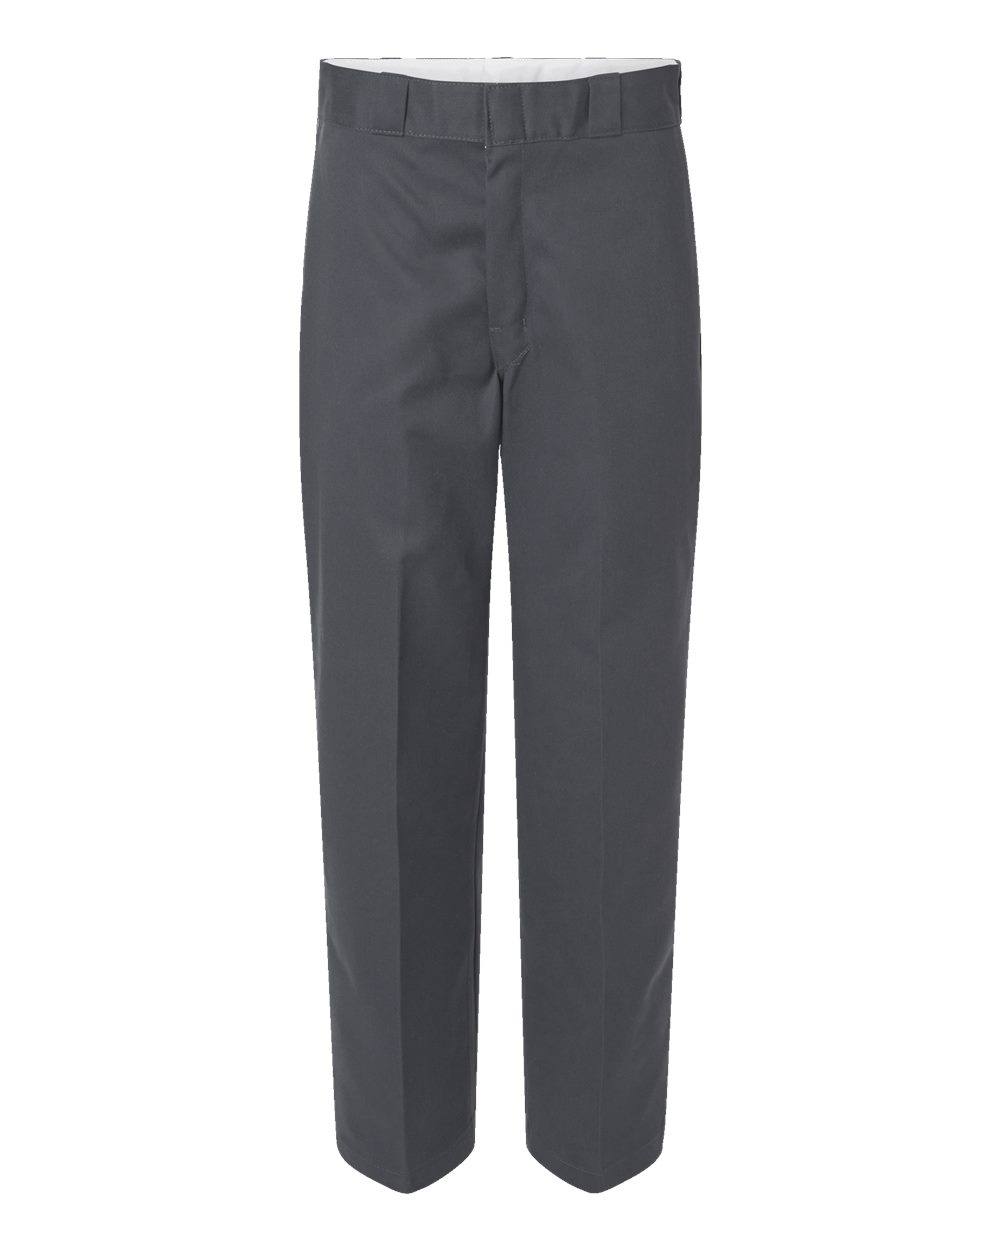 Work Pants - Extended Sizes-